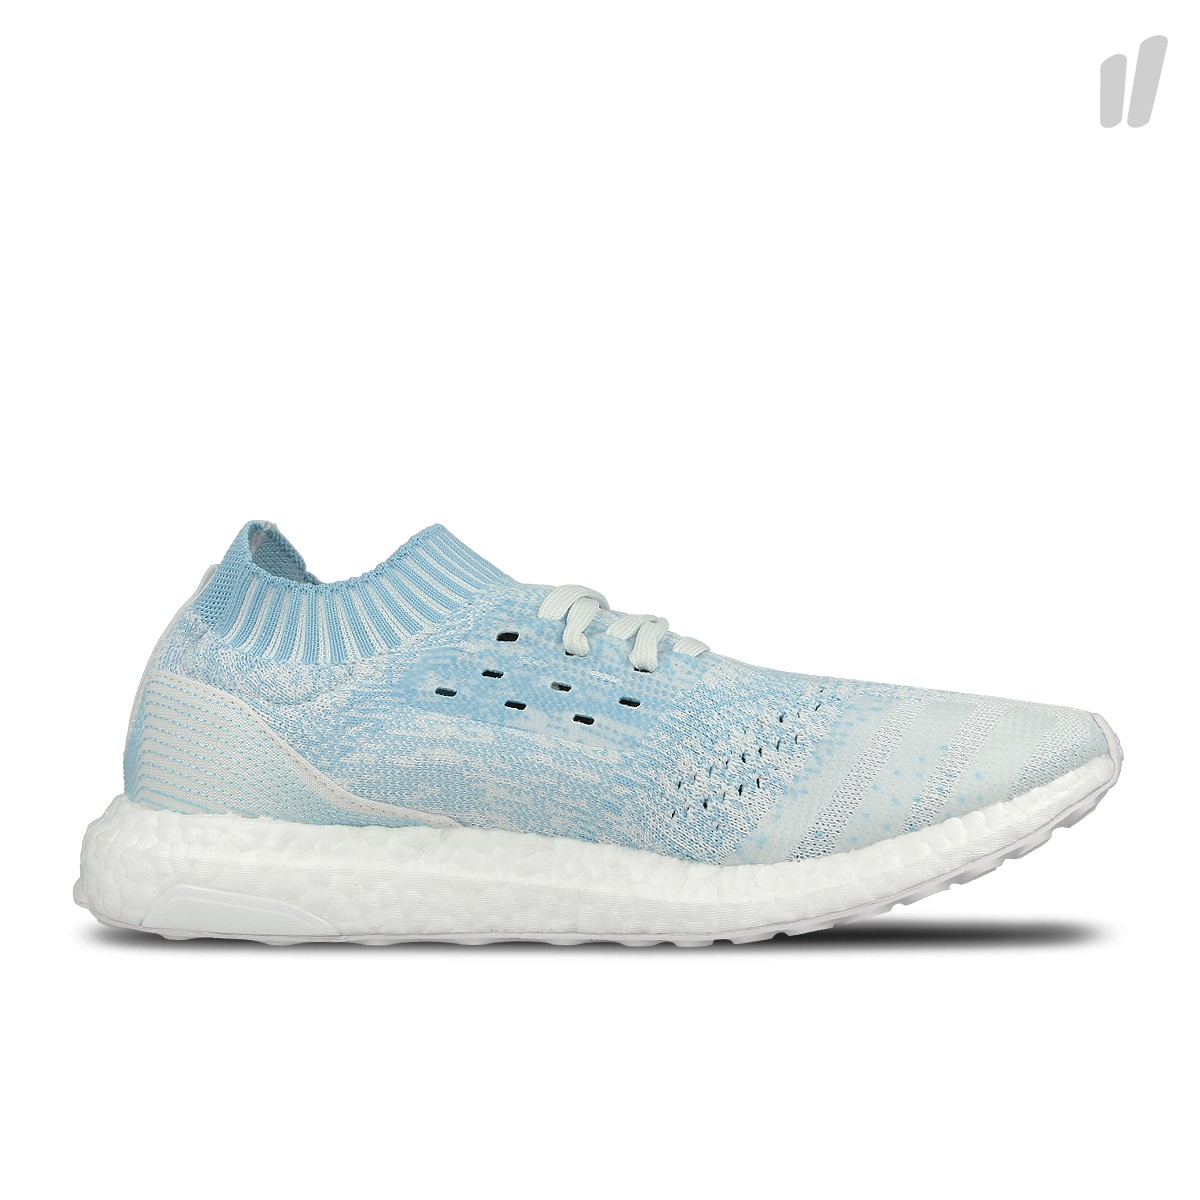 Adidas UltraBOOST Uncaged Parley
Footwear White / Icey Blue